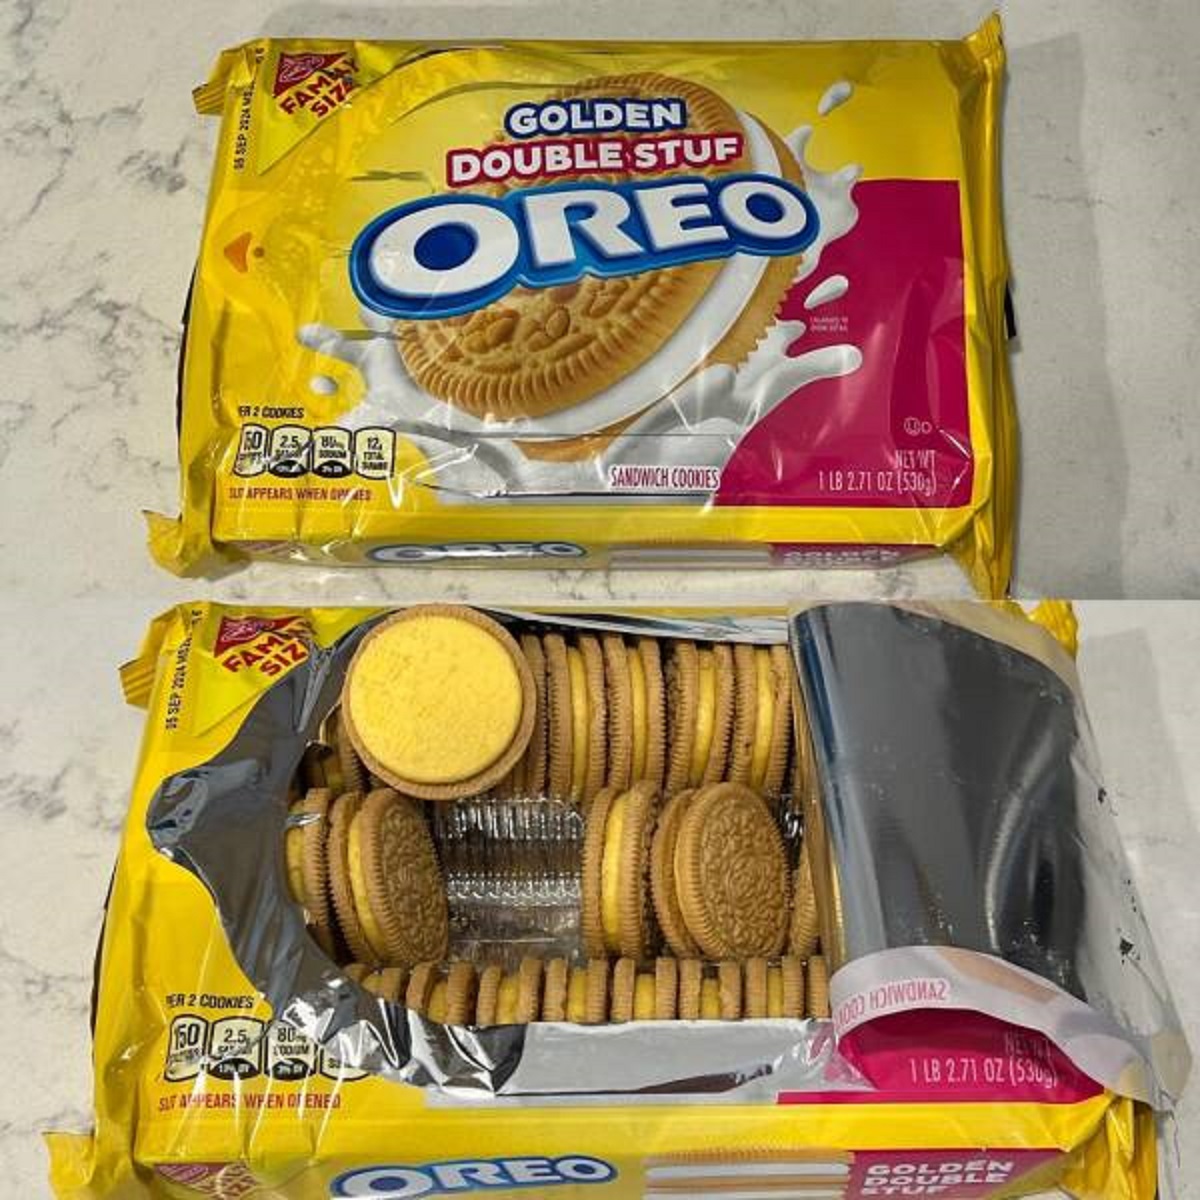 "My Oreos came with lemon filling instead of regular"